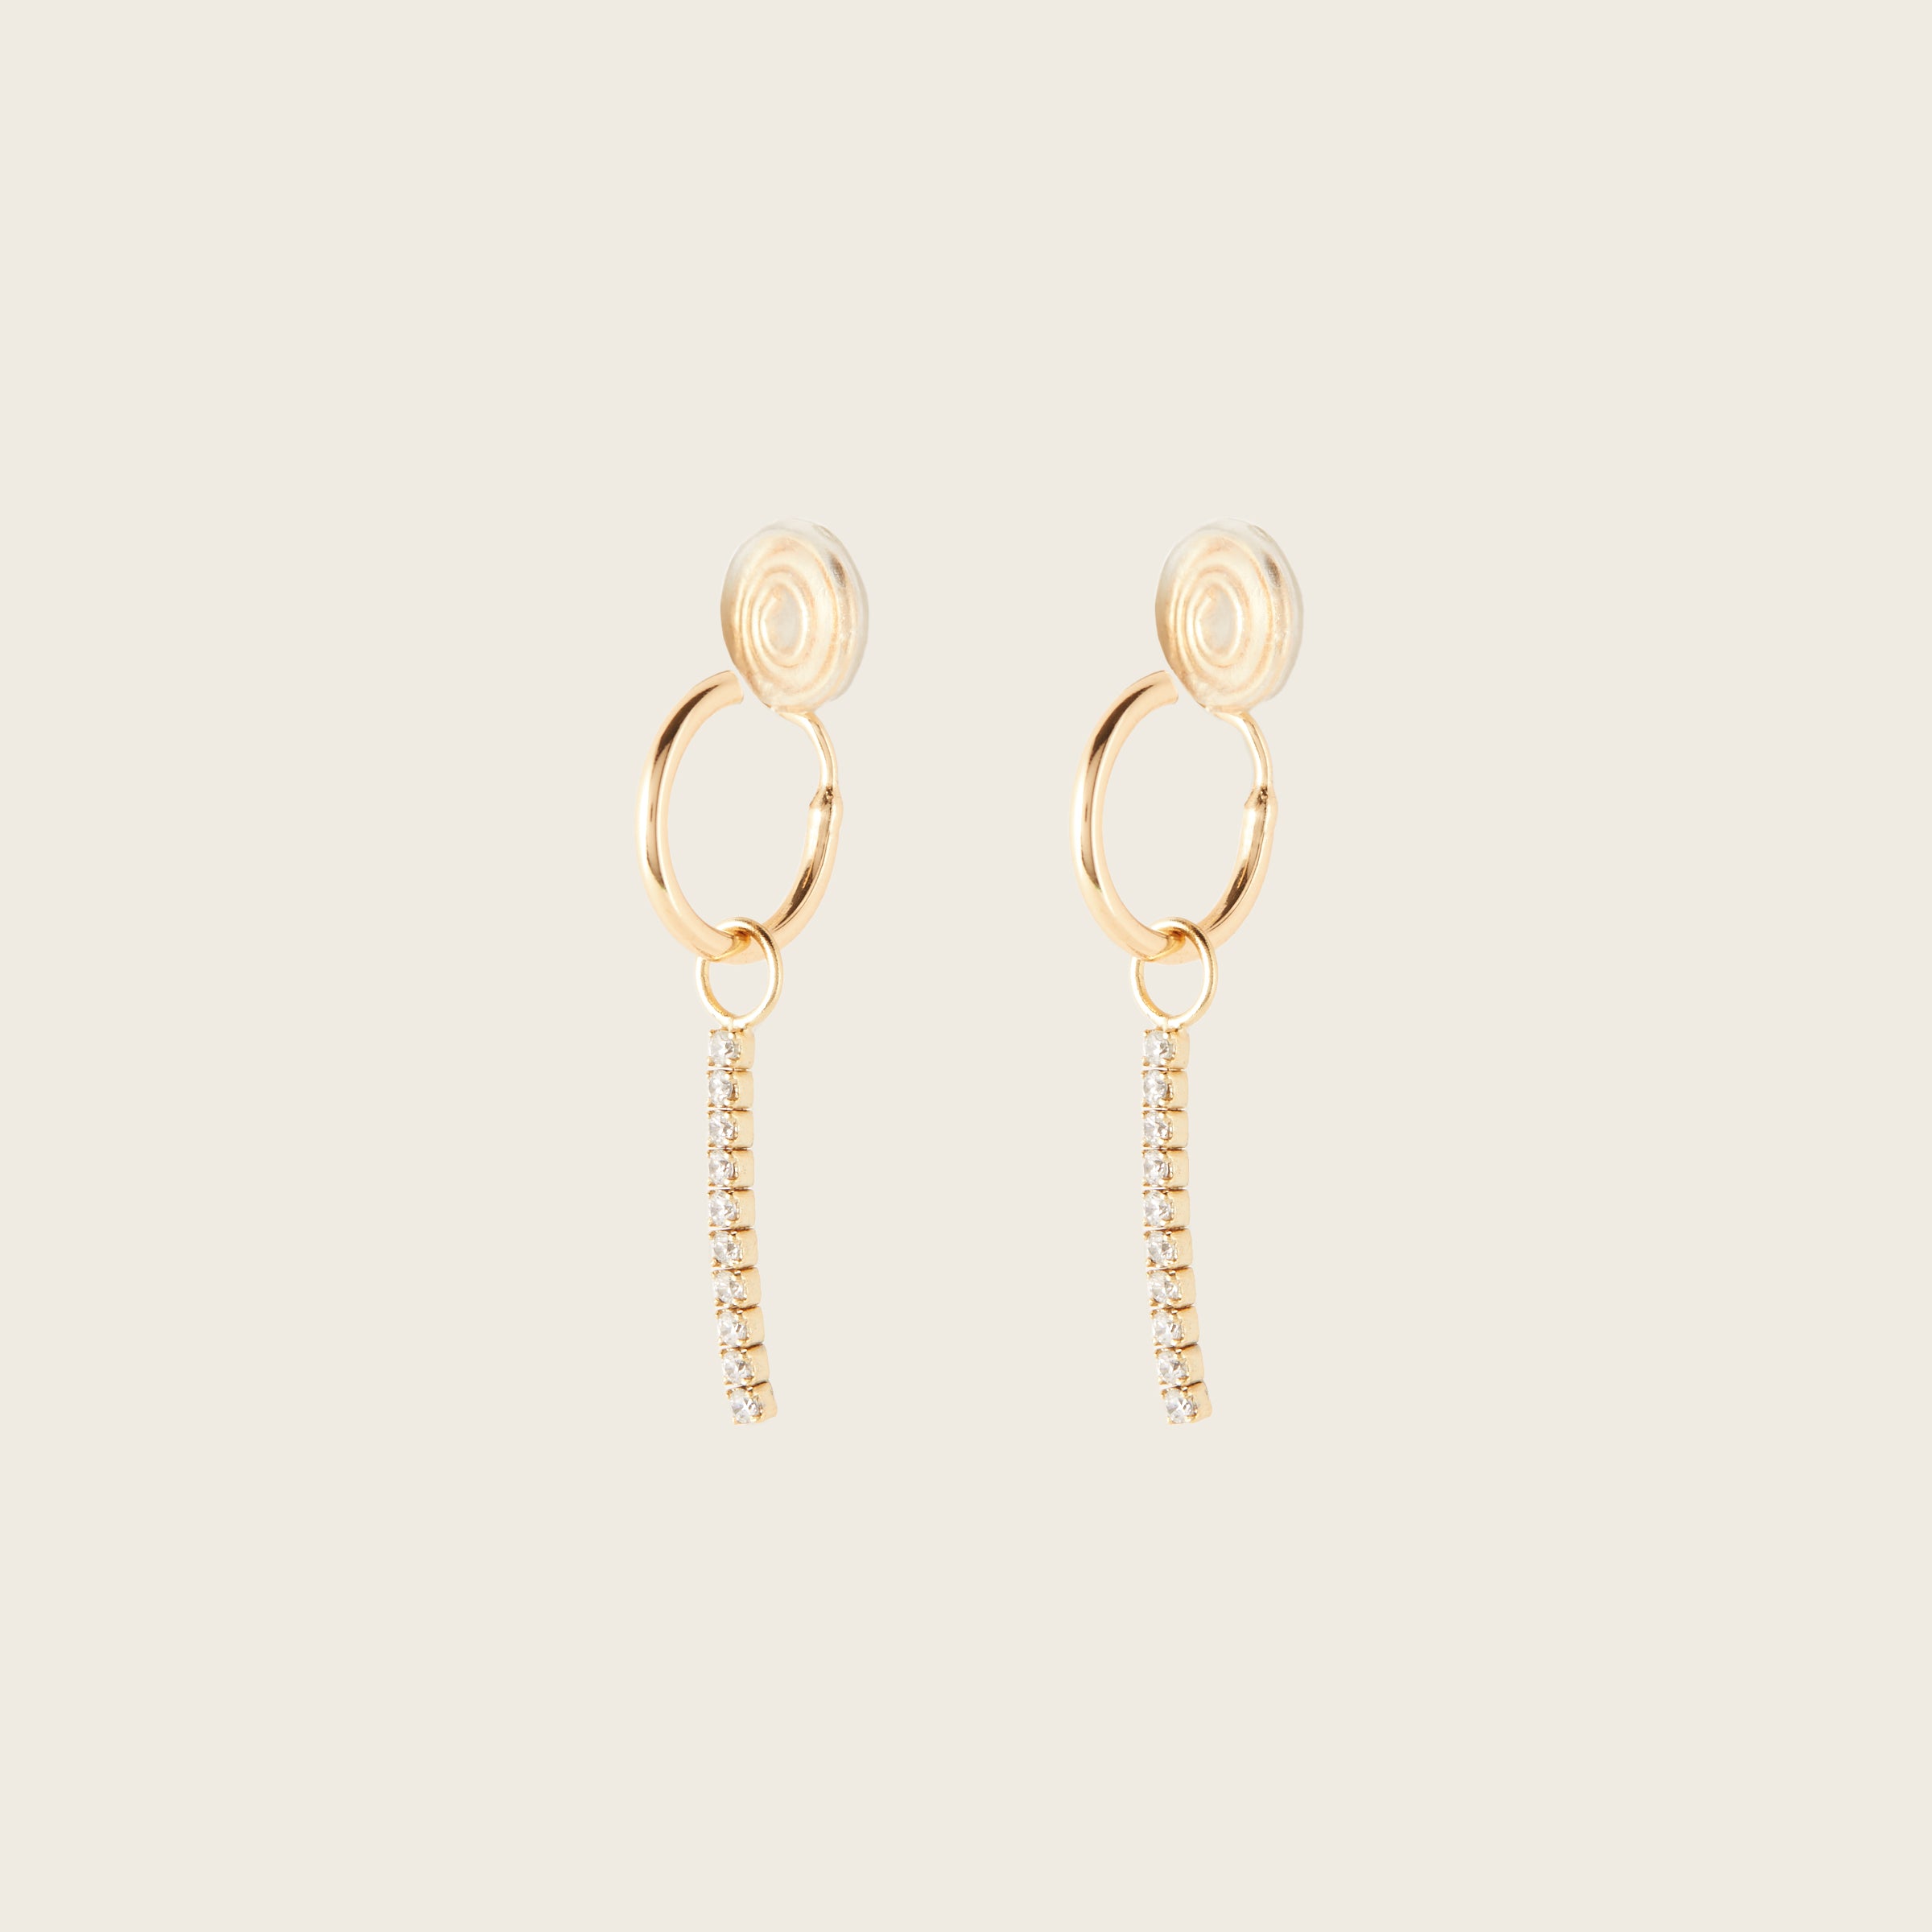 Image of the Pavé Bar Hoop Charms are made with high-quality materials, including 18K gold plating over 925 Sterling Silver. These charms are both non-tarnish and water resistant. The perfect combination of style and durability.